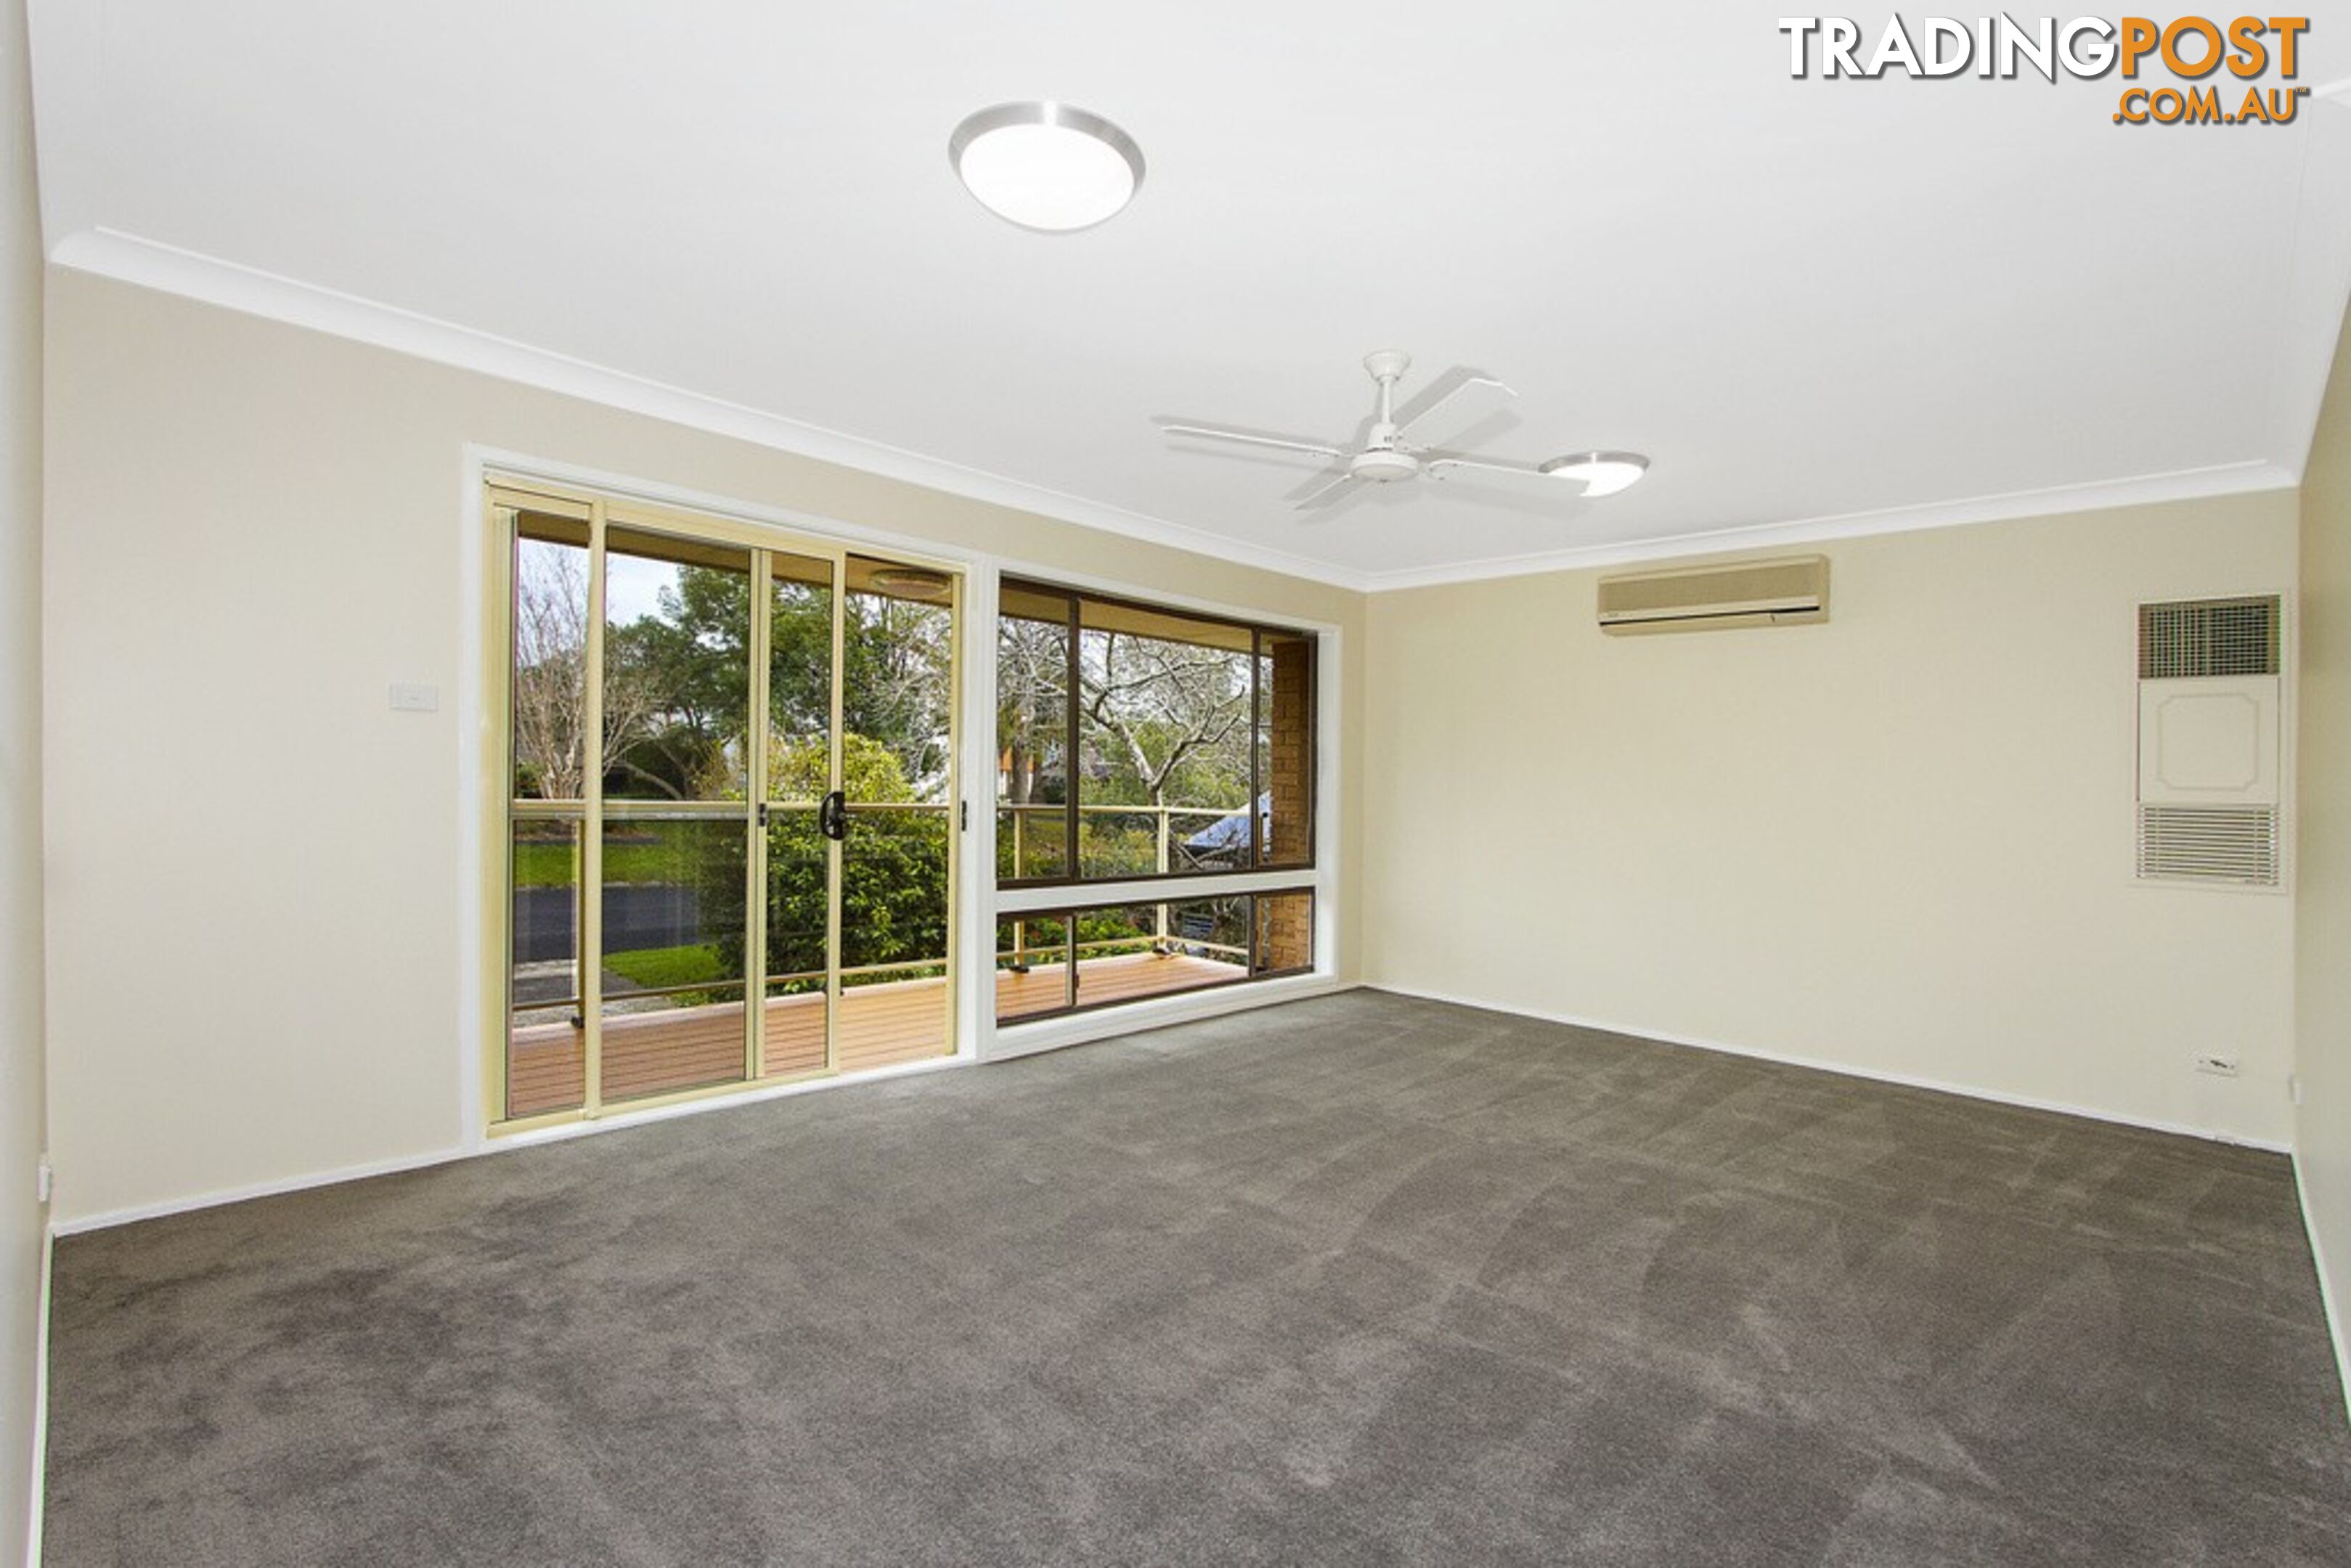 33 Collard Road POINT CLARE NSW 2250